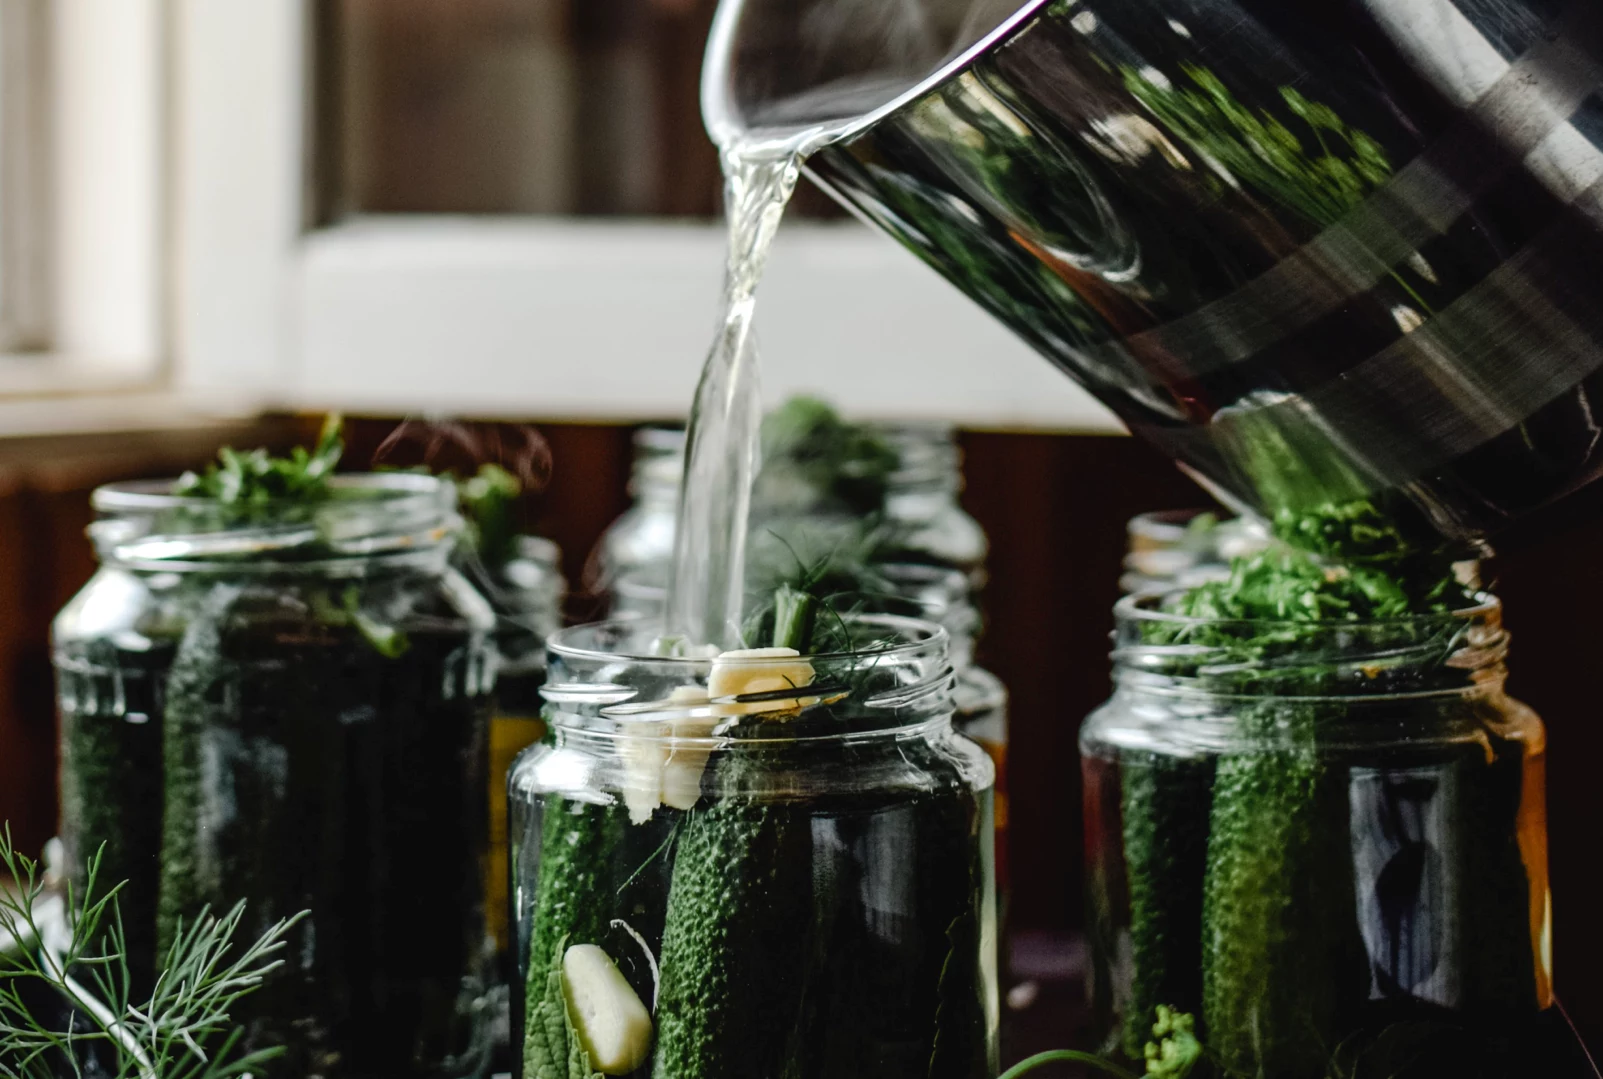 Brine being poured into pickle jars